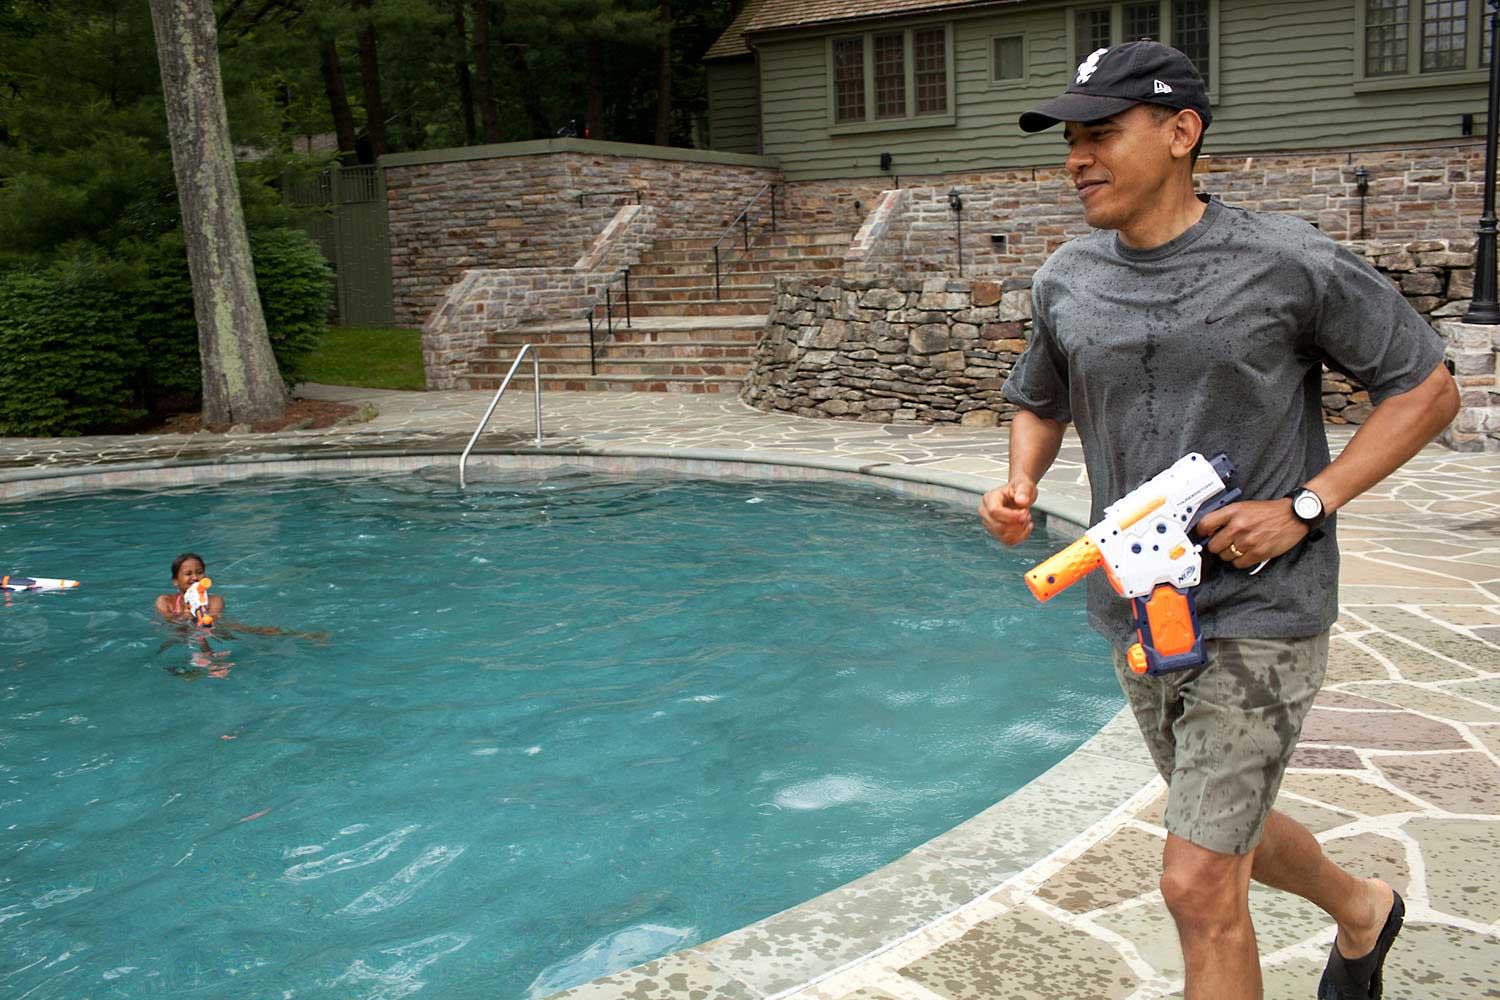 President Obama joins in a water gun fight with daughter Sasha during her 10th birthday celebration at Camp David, Md., June 11, 2011.